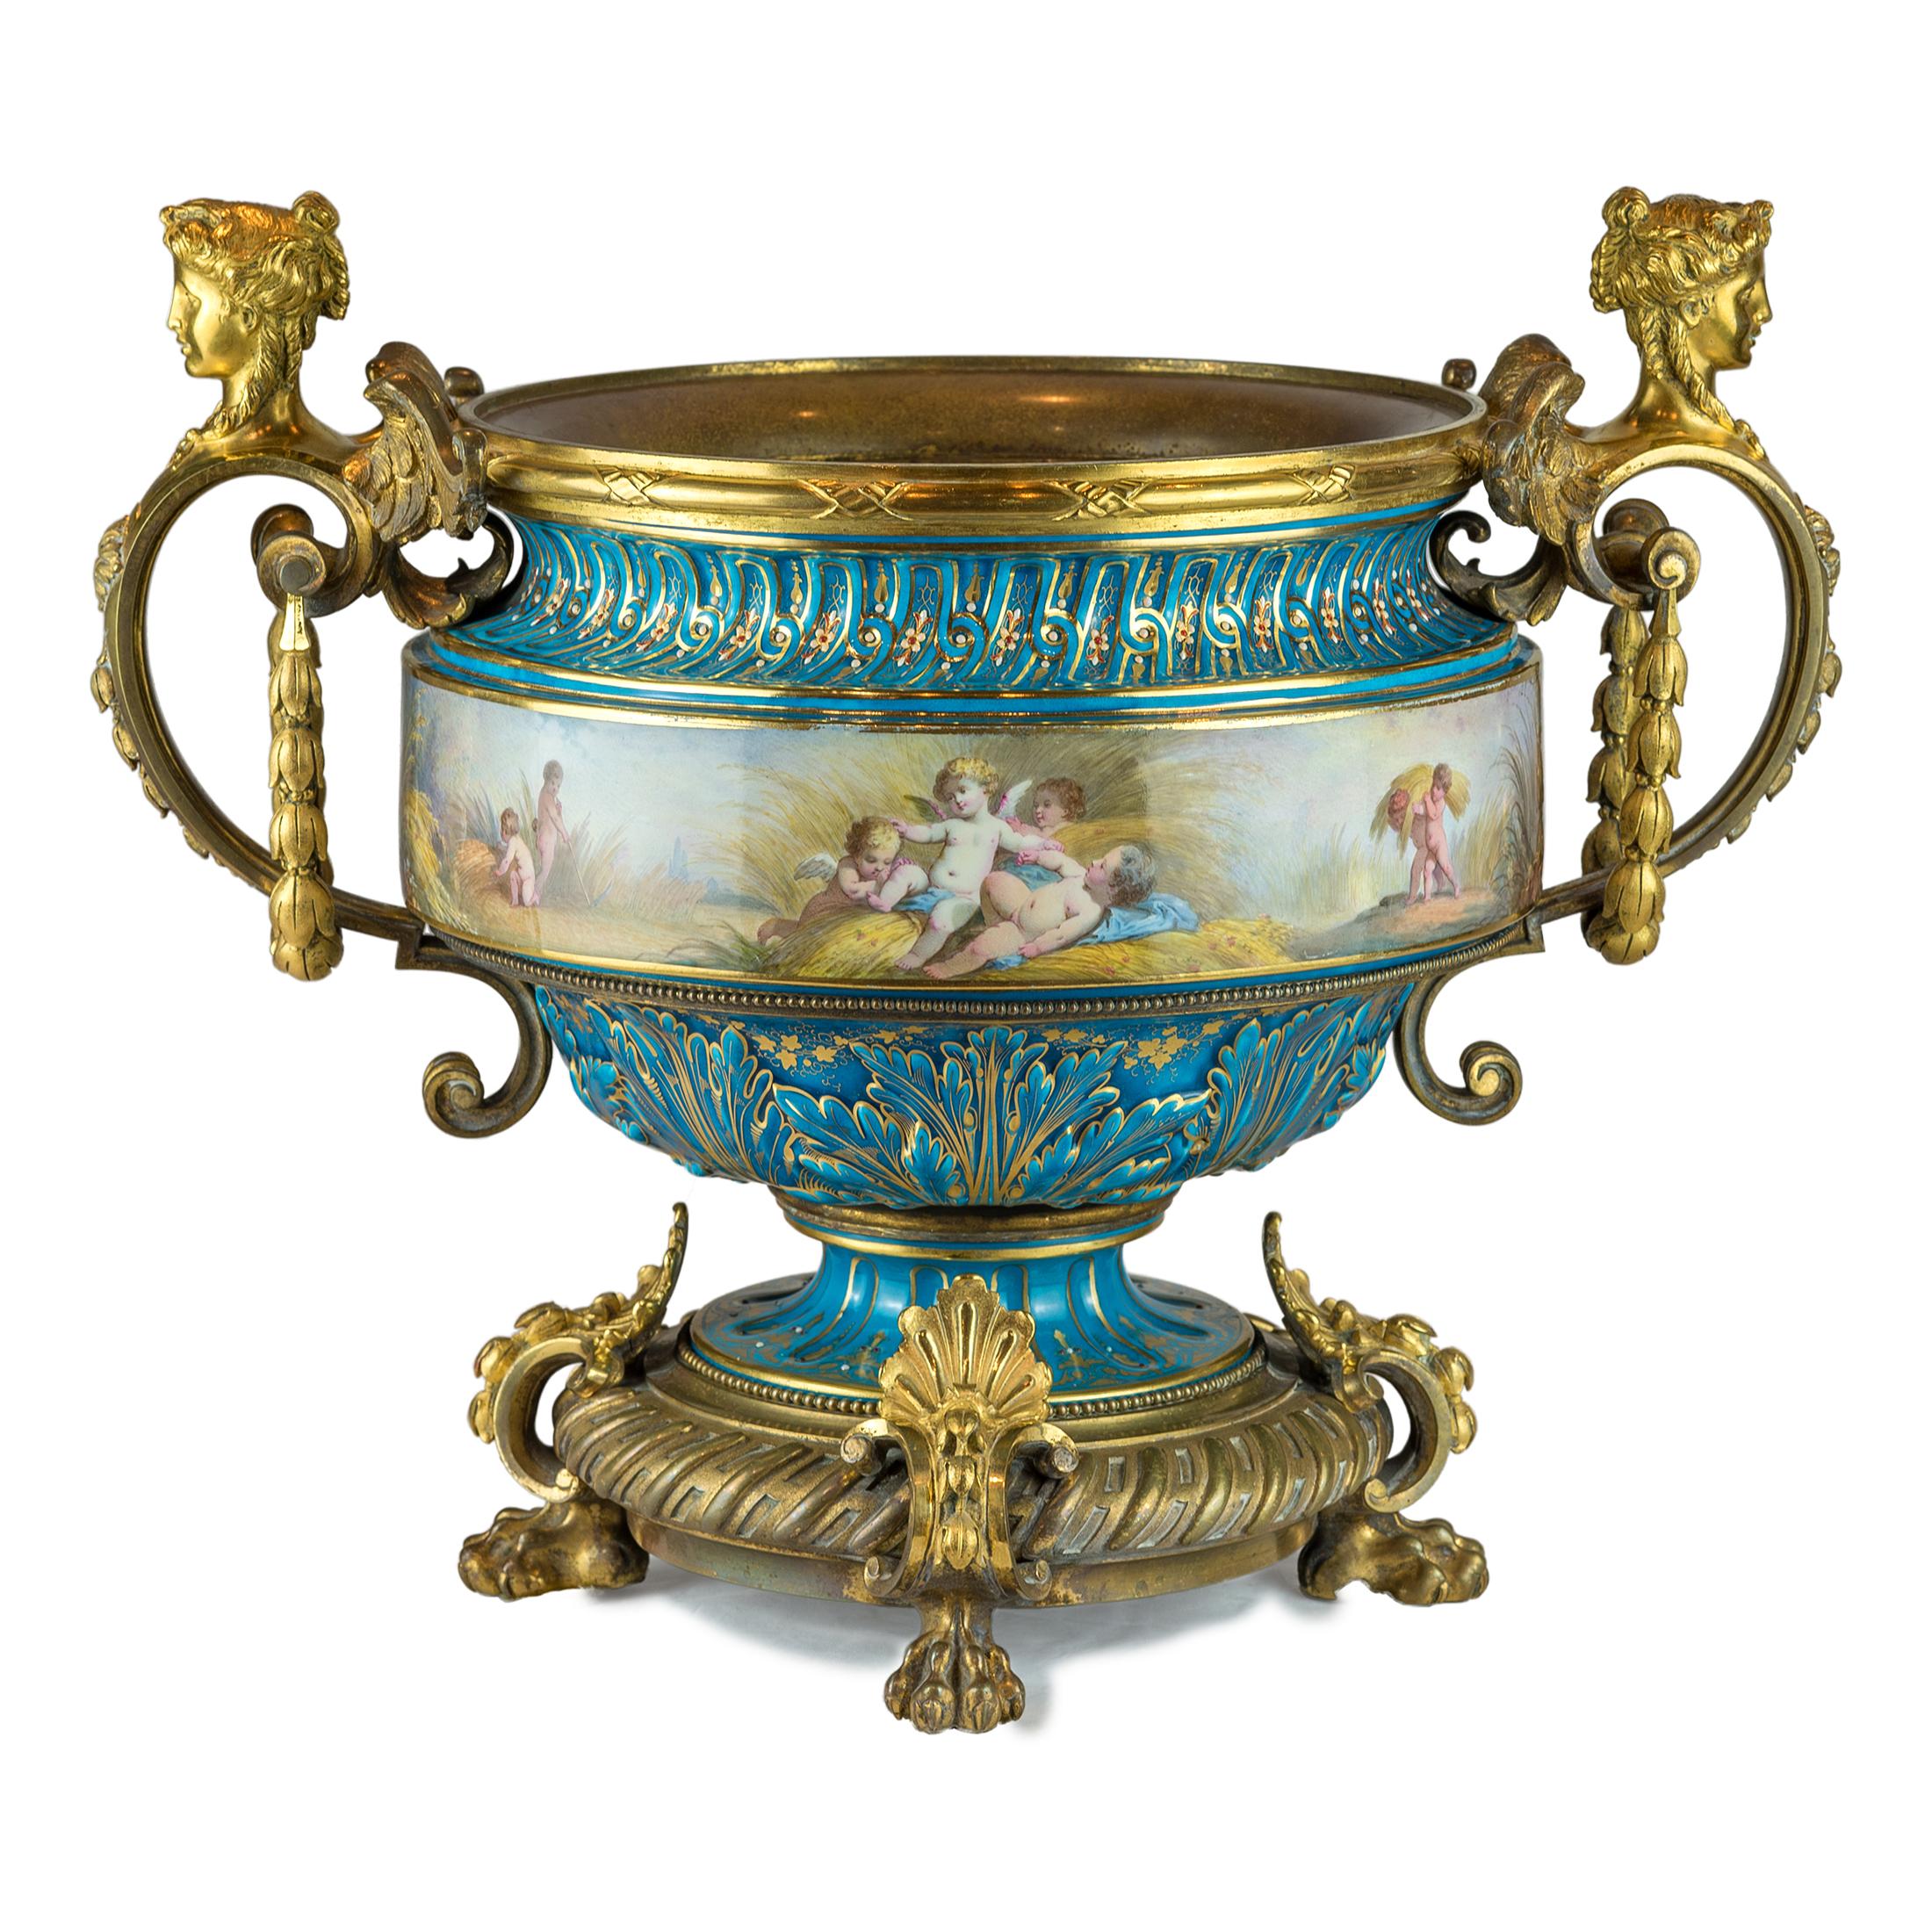 A fine quality large sevres-style and gilt bronze centerpiece.
Hand painted porcelain with frolicking putti in landscape. Surrounded by heavy bronze mounts with winged female caryatid handles raised on claw feet. 

Origin: French
Date: 19th